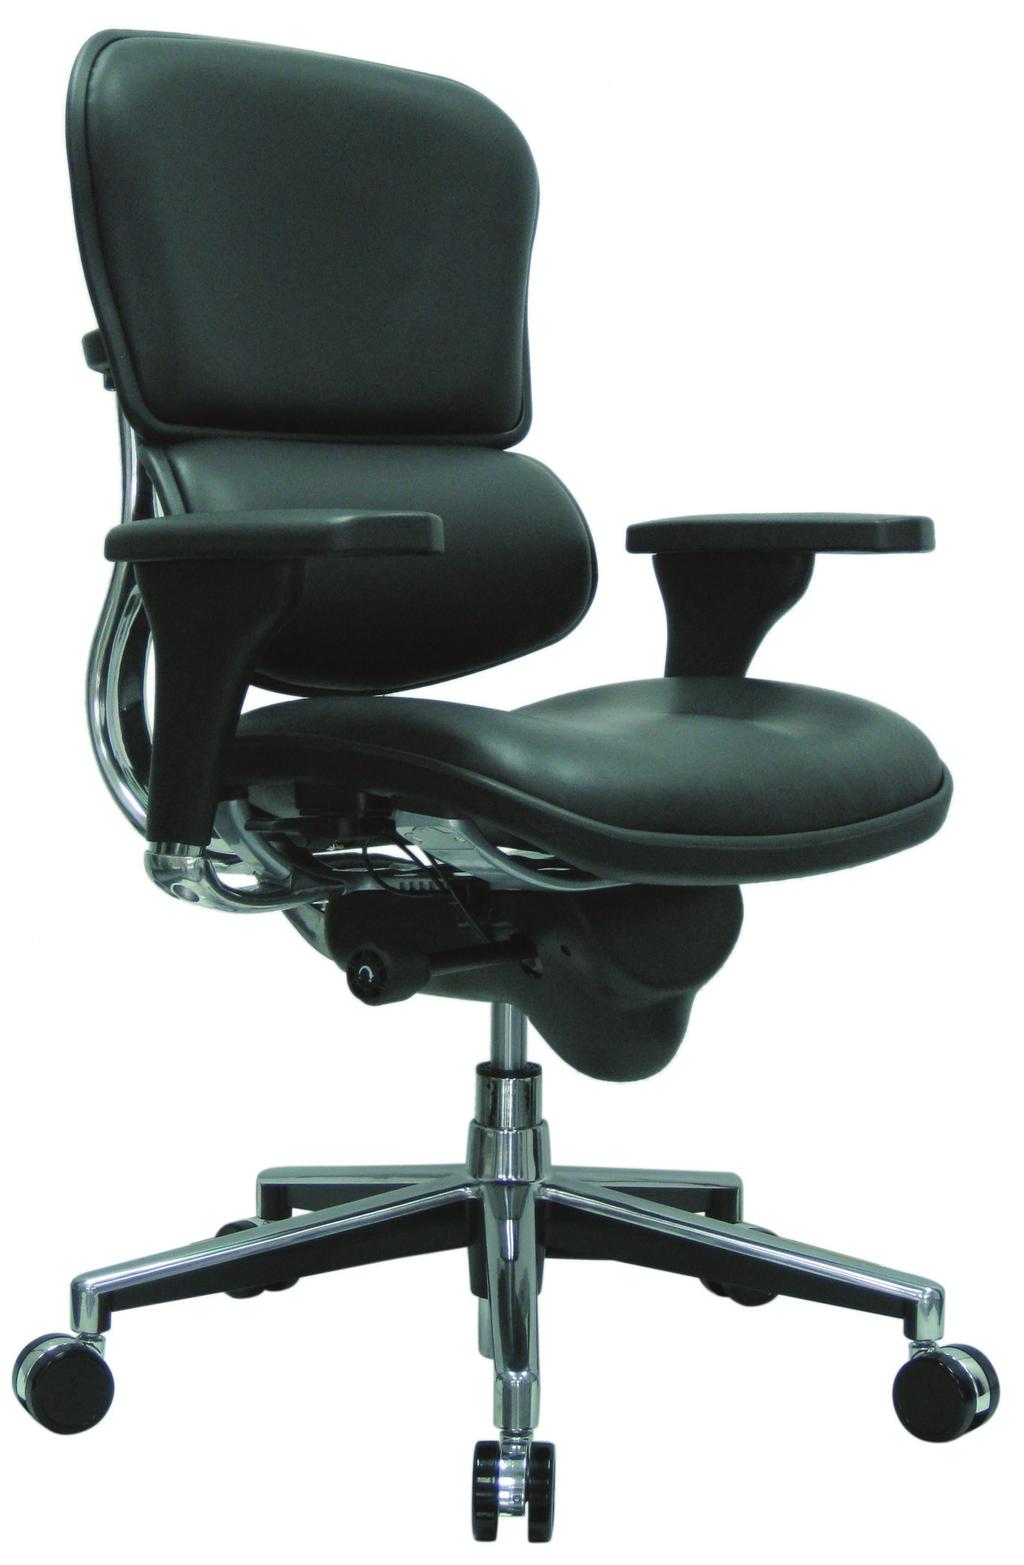 Insider s Guide to Buying an Office Chair: The Top 10 Things to Consider Did you know that the average American office worker spends about 2,200 hours per year sitting in a chair at a desk or other